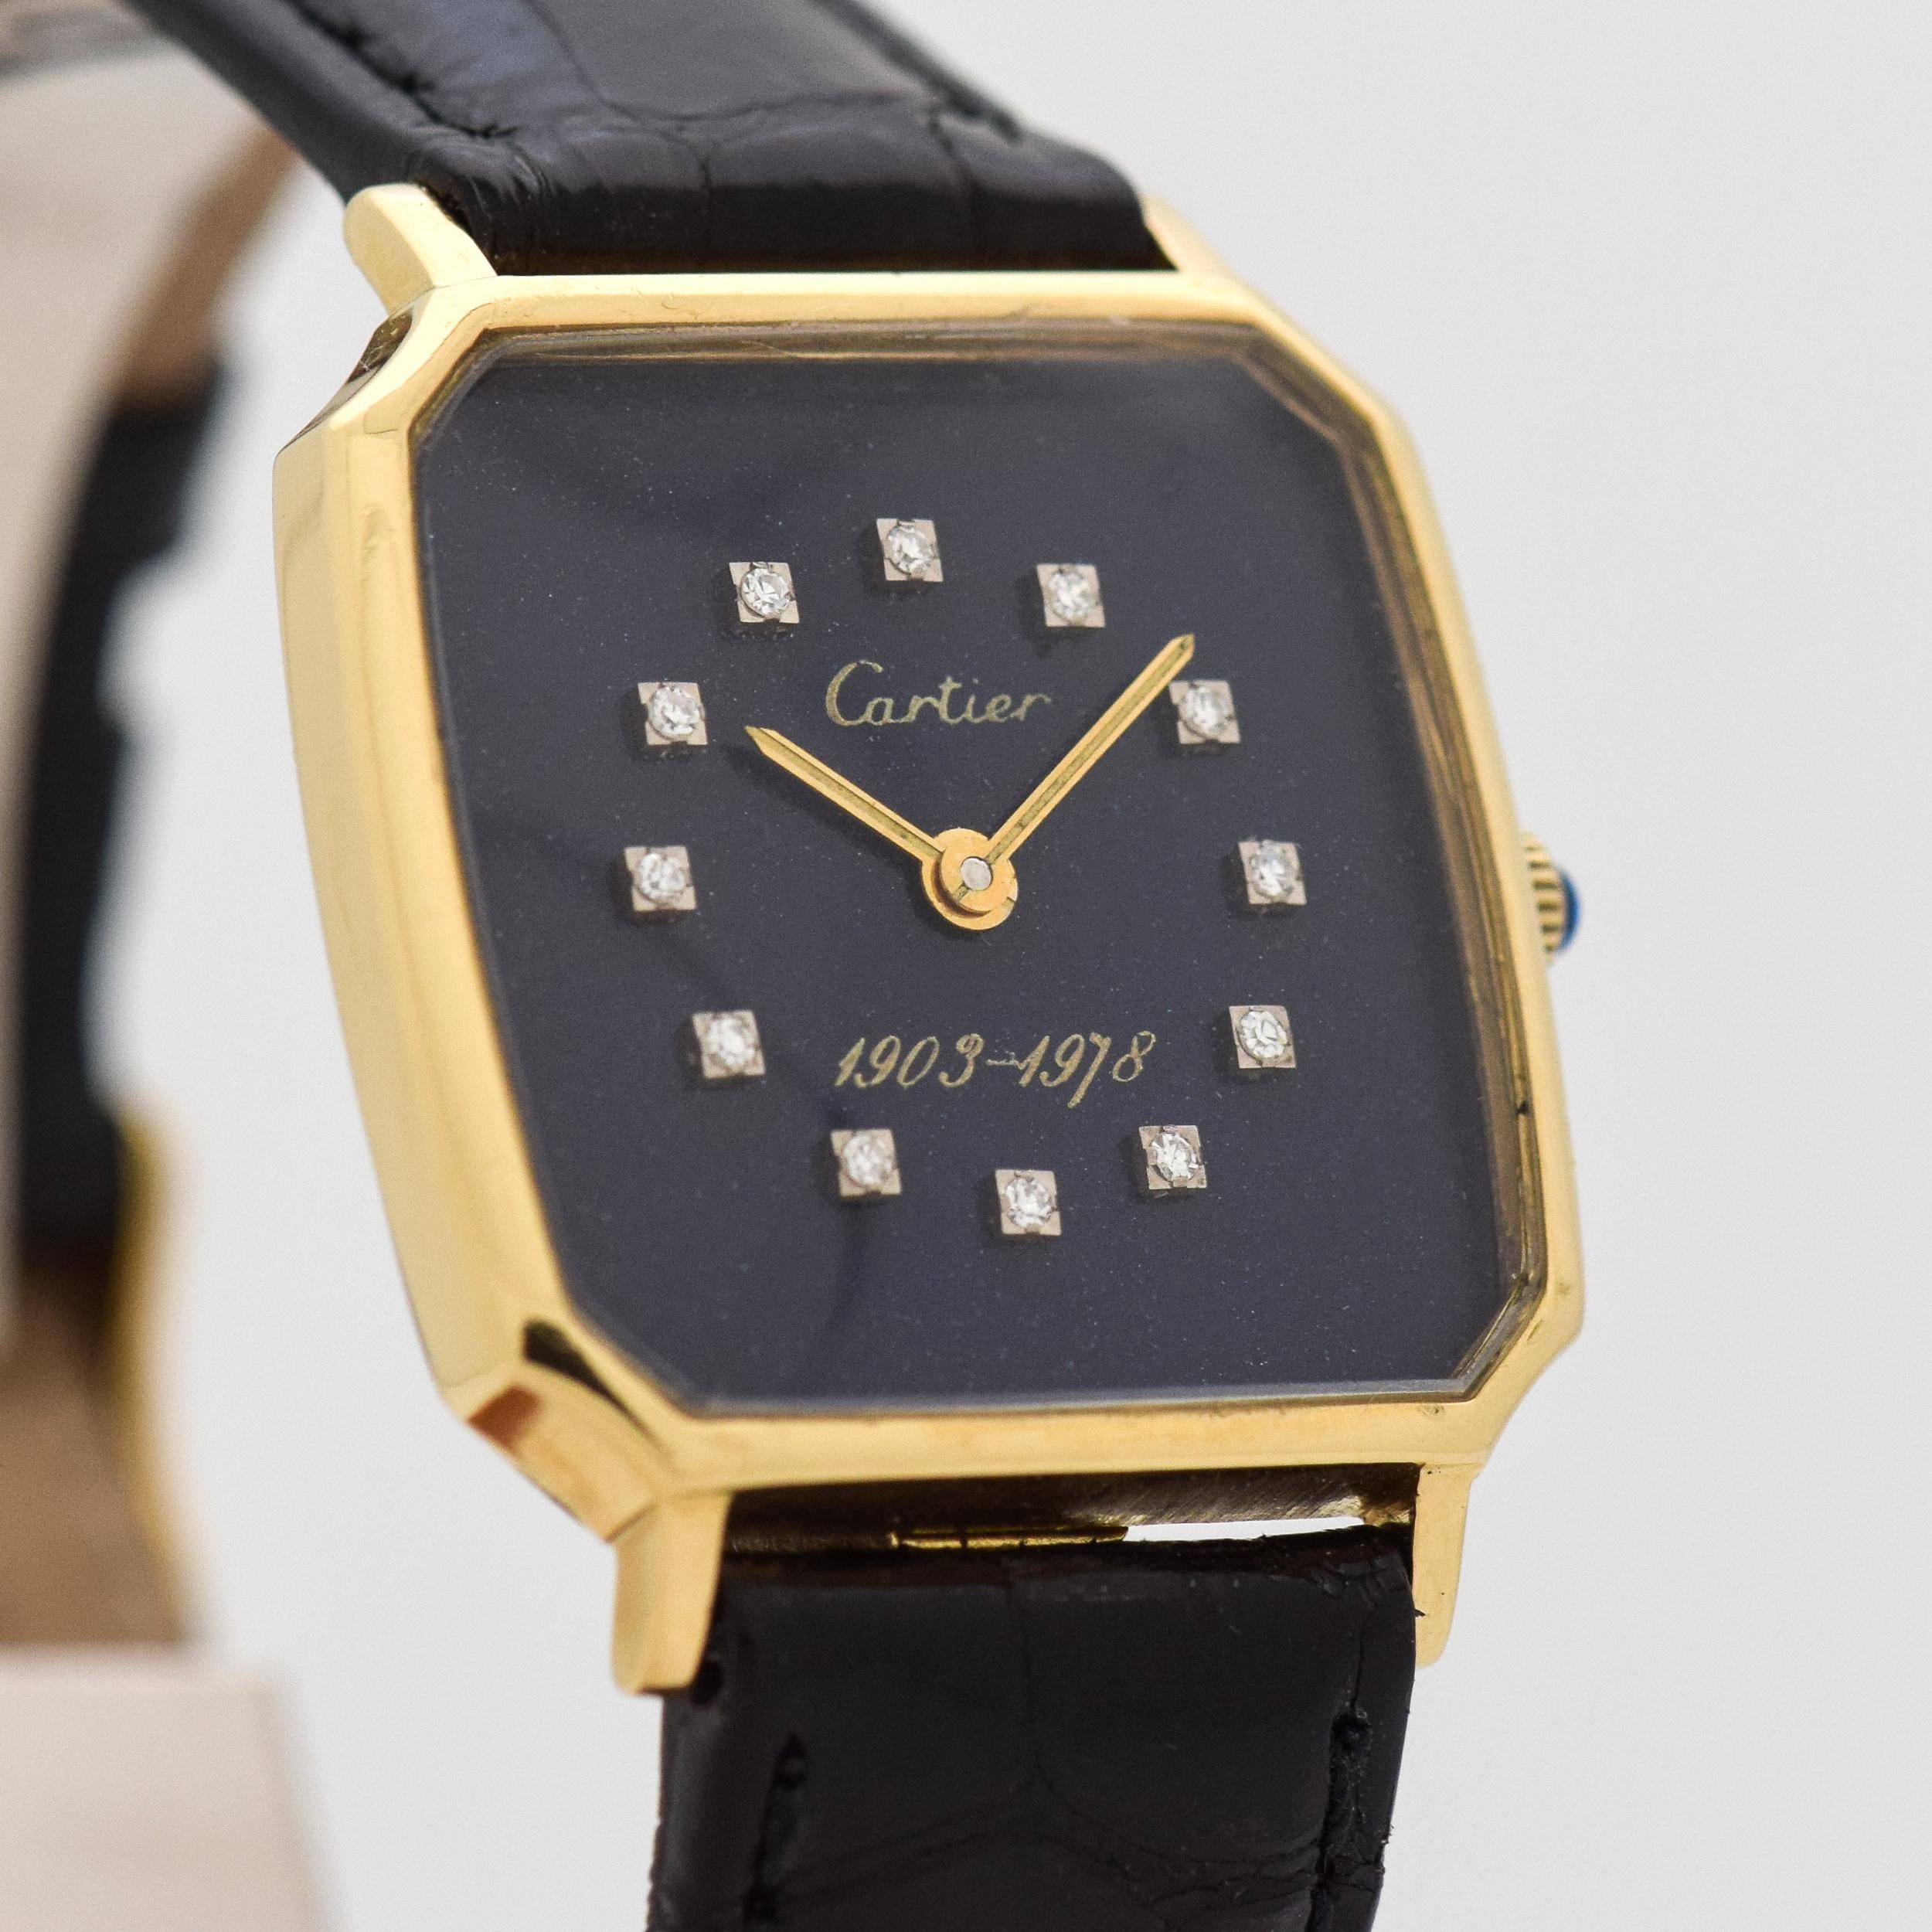 1978 Vintage Cartier 18k Yellow Gold Recognition of 75 Years of the Ford Motor Company watch Presented from Henry Ford to Employees with Original Blue Metallic Dial with Applied Square Diamond Markers. 27mm x 34mm lug to lug (1.06 in. x 1.34 in.) 17